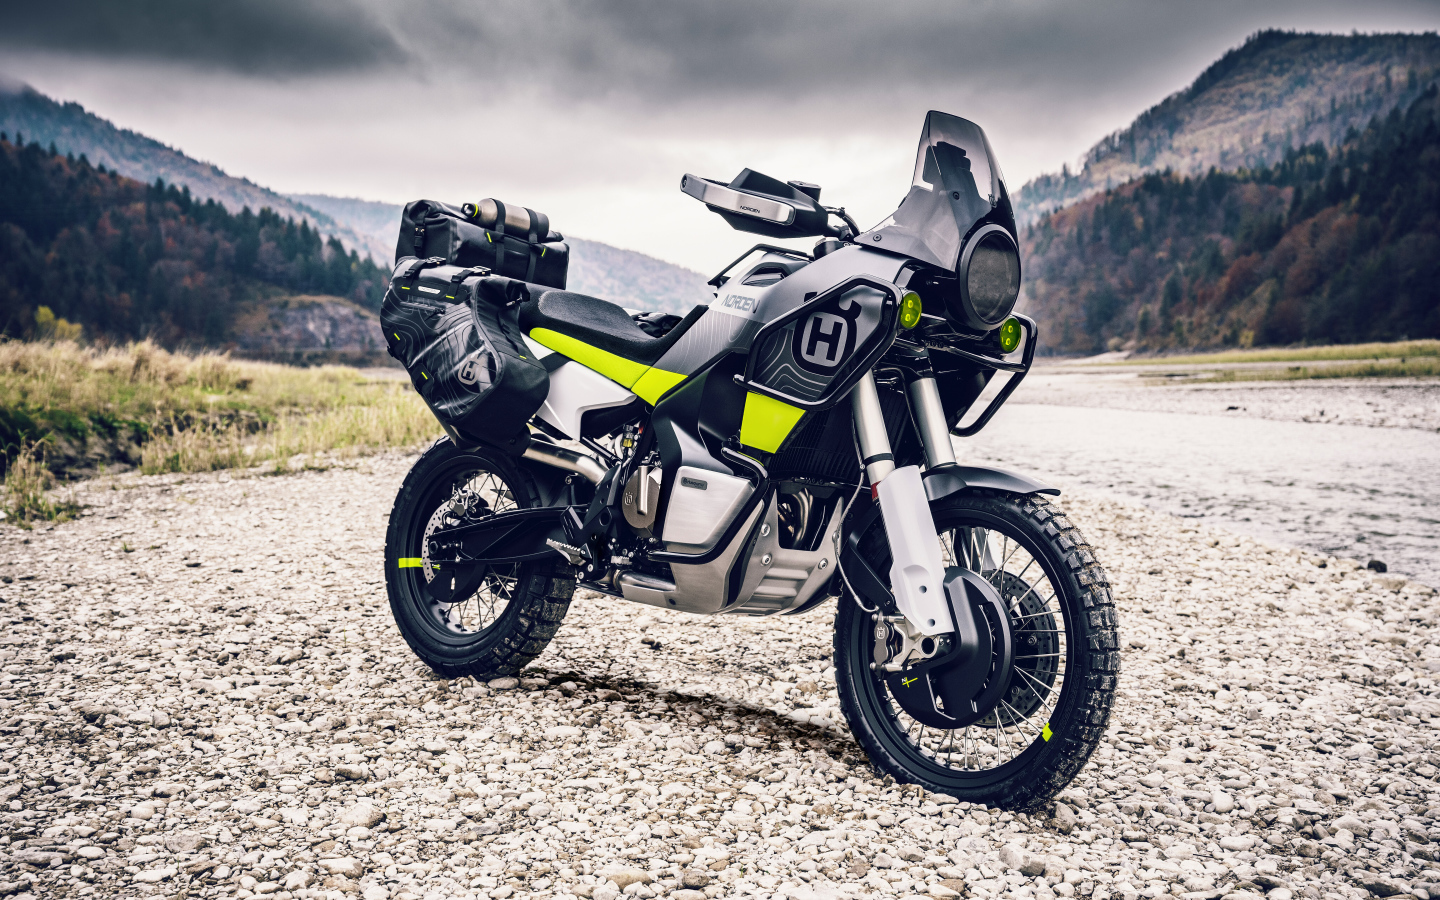 Husqvarna Norden 901 motorcycle on a background of mountains